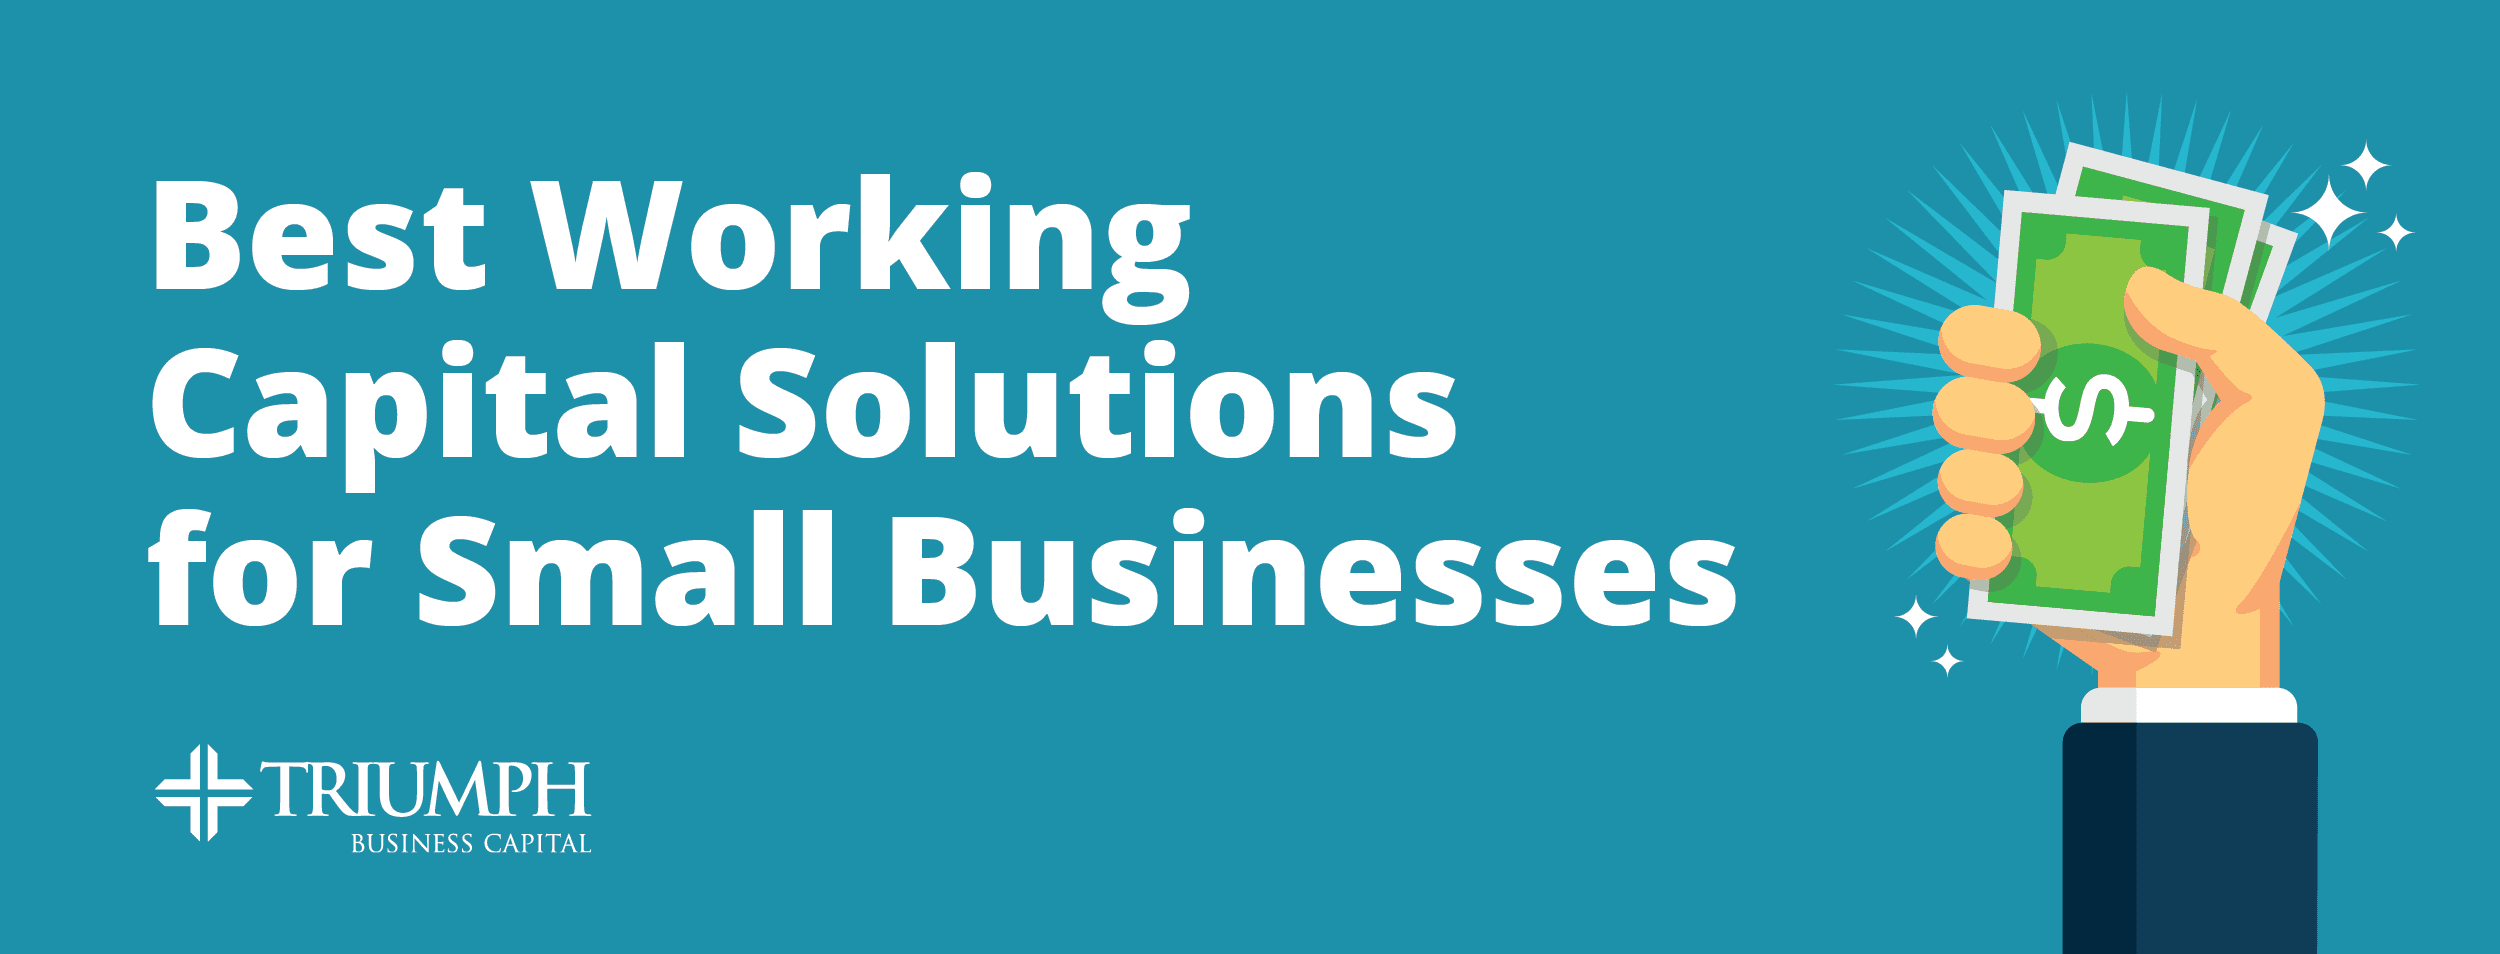 Image for Best Working Capital Solutions for Small Businesses